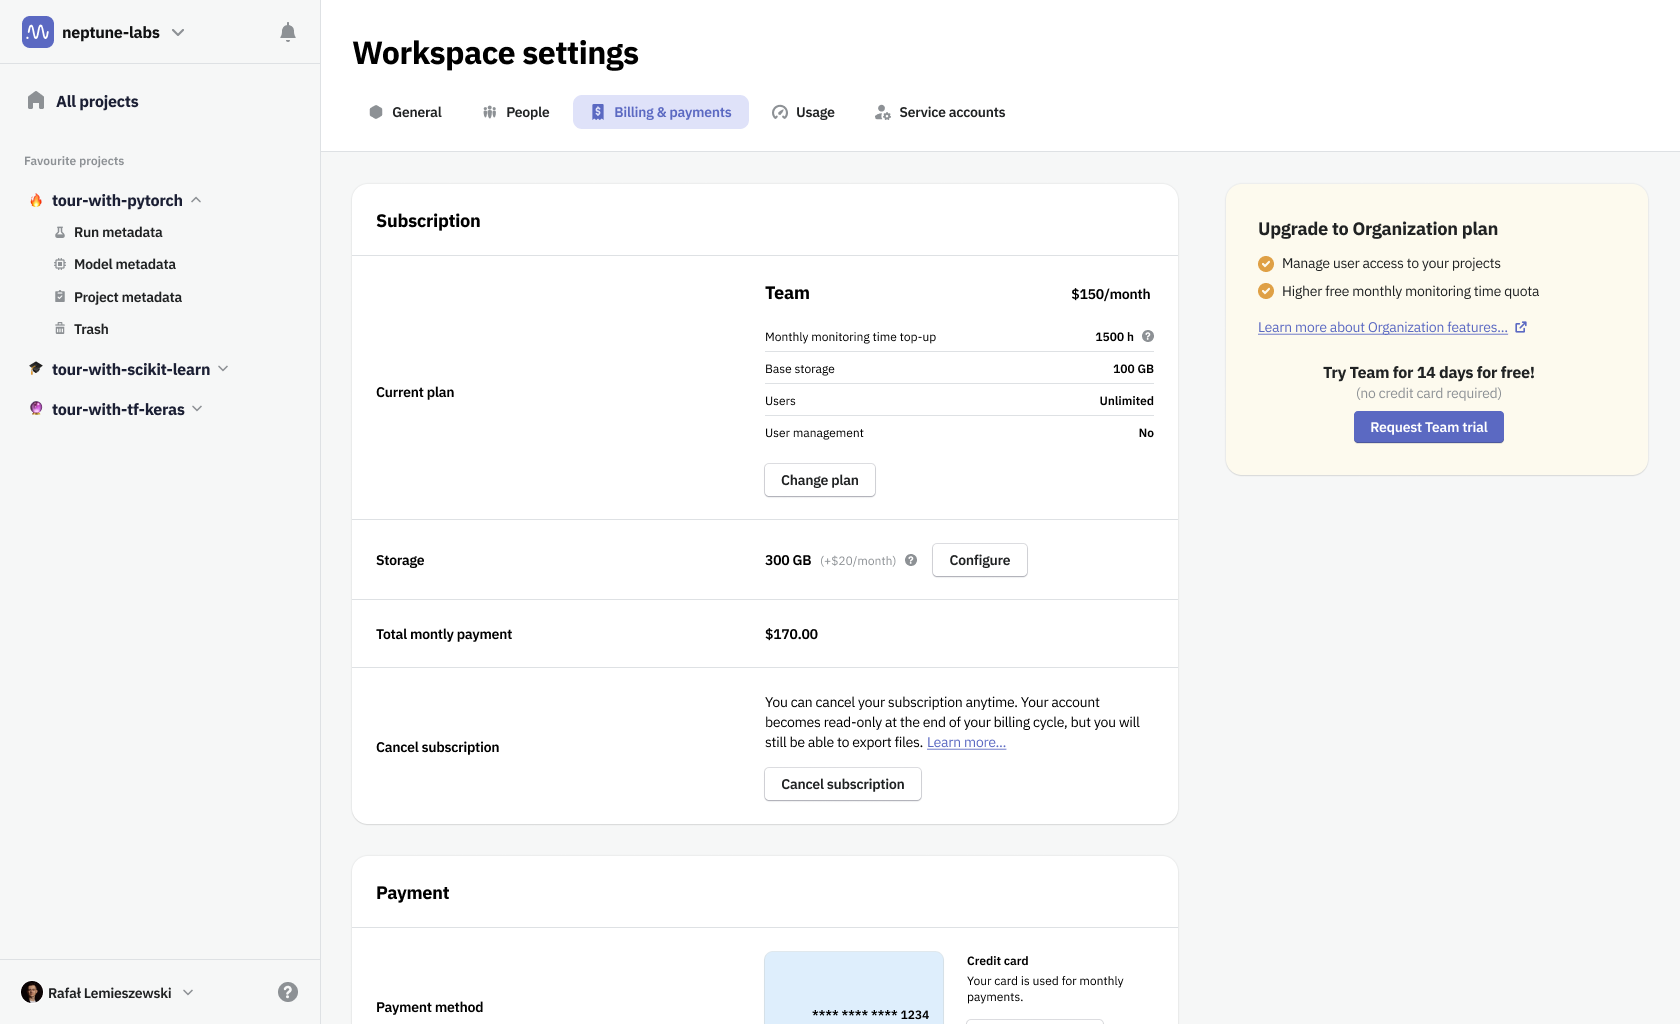 Workspace billing and payments settings